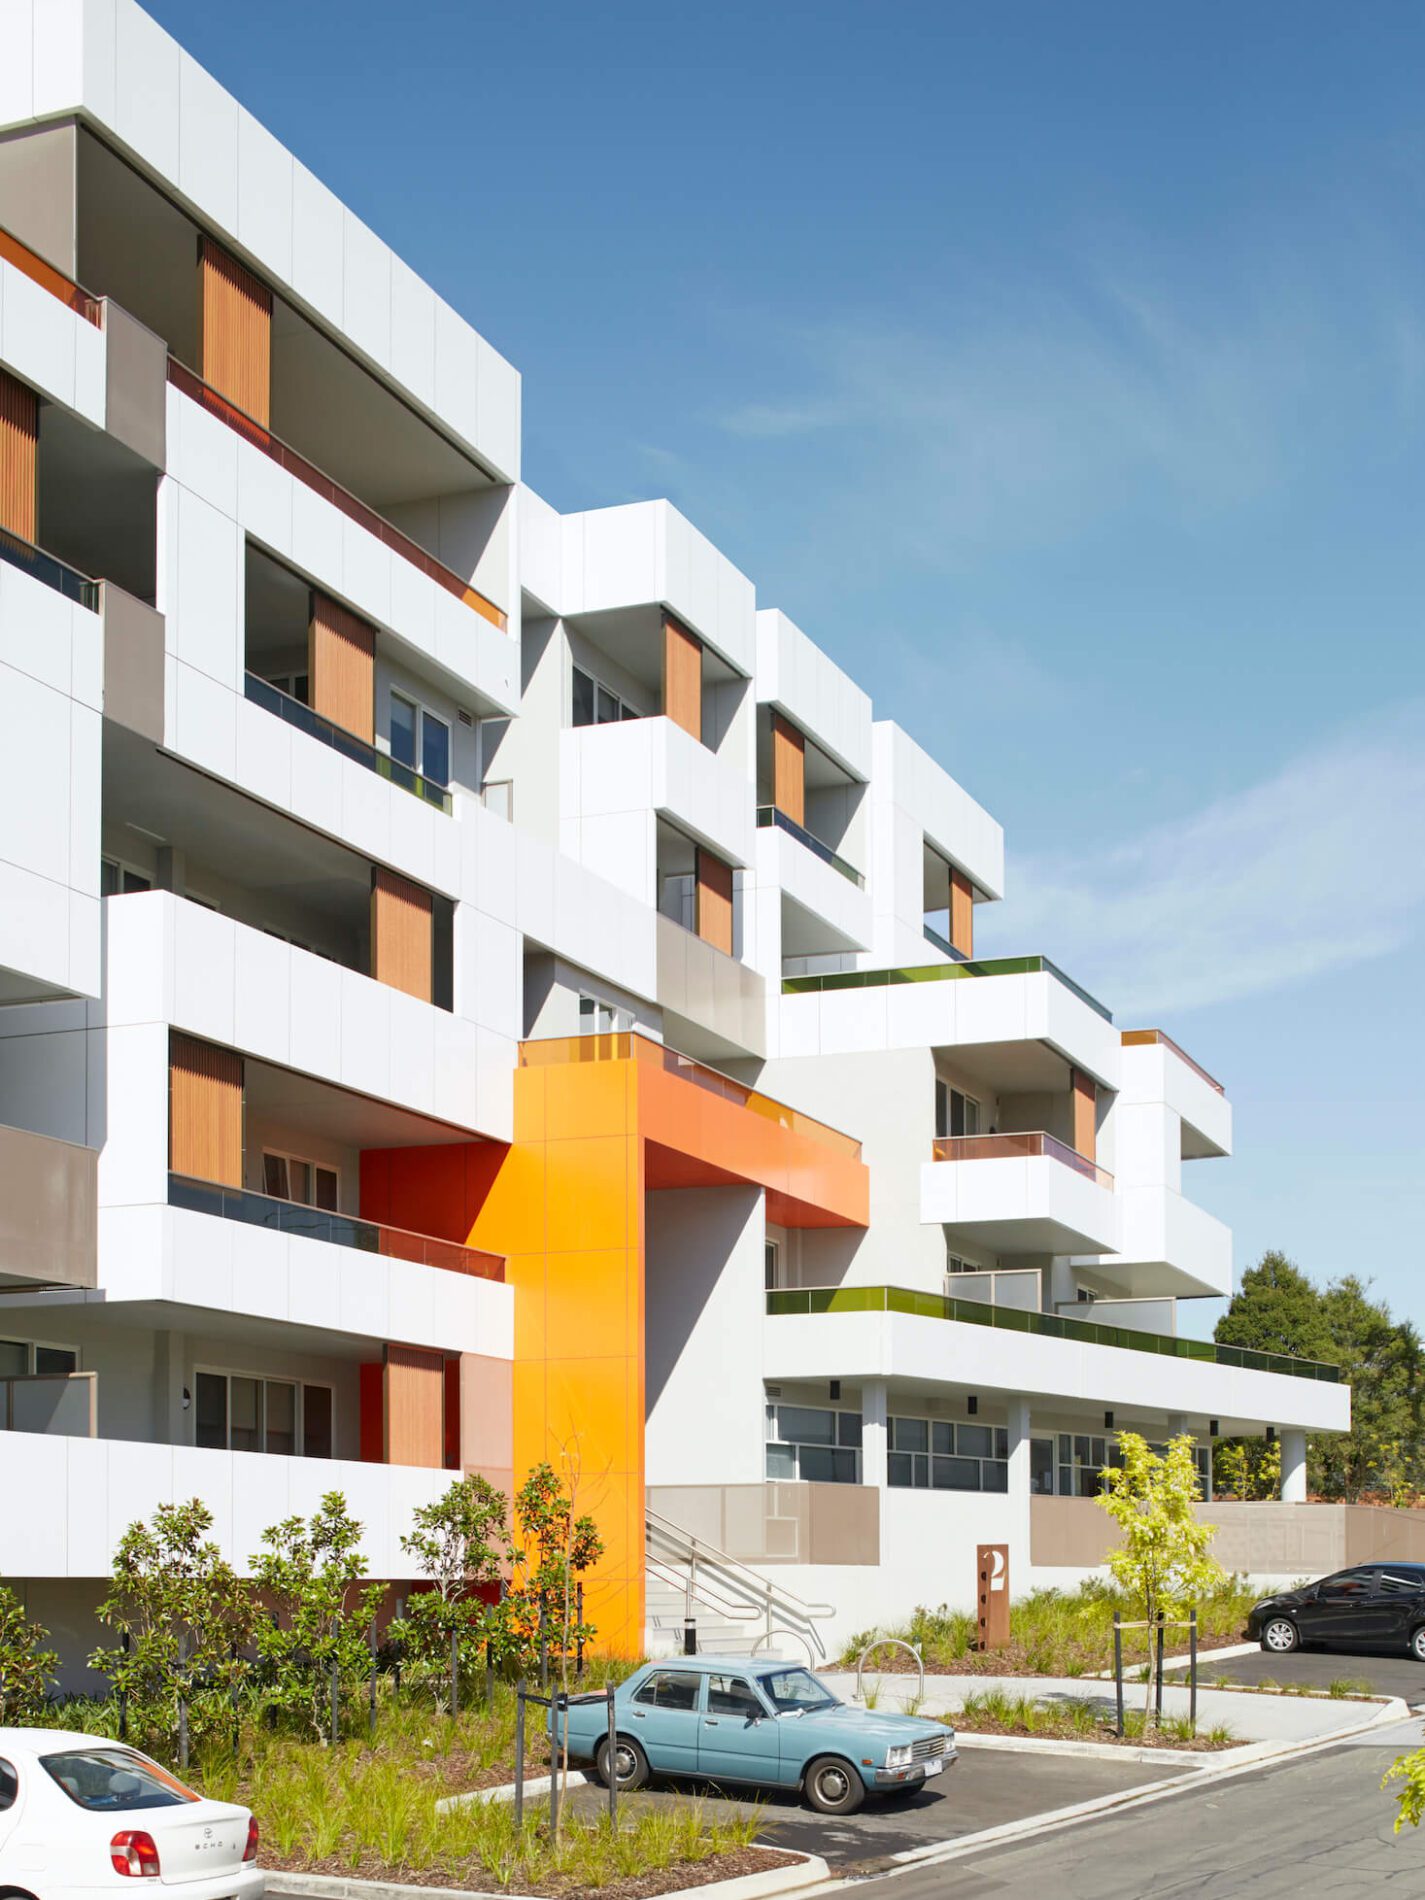 A white multi-storey apartment building with orange and green feature elements, cars parked out front